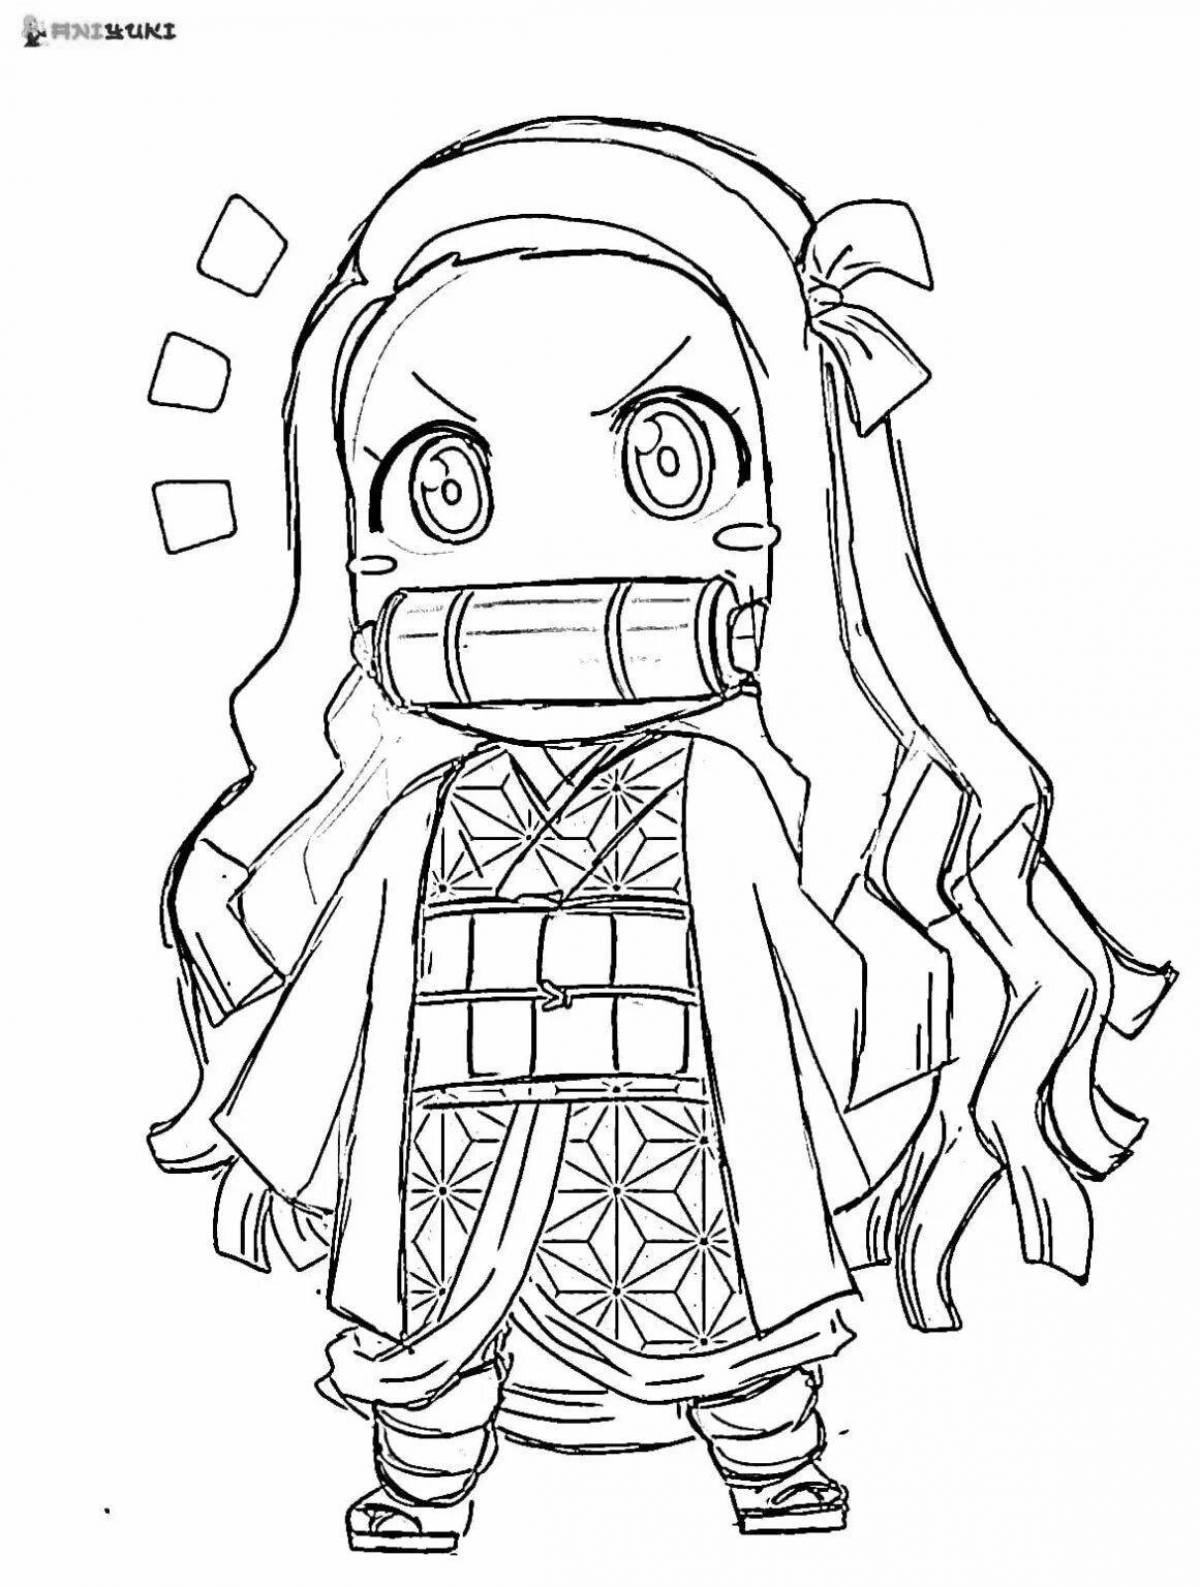 Colorful chibi demon cleaver coloring page